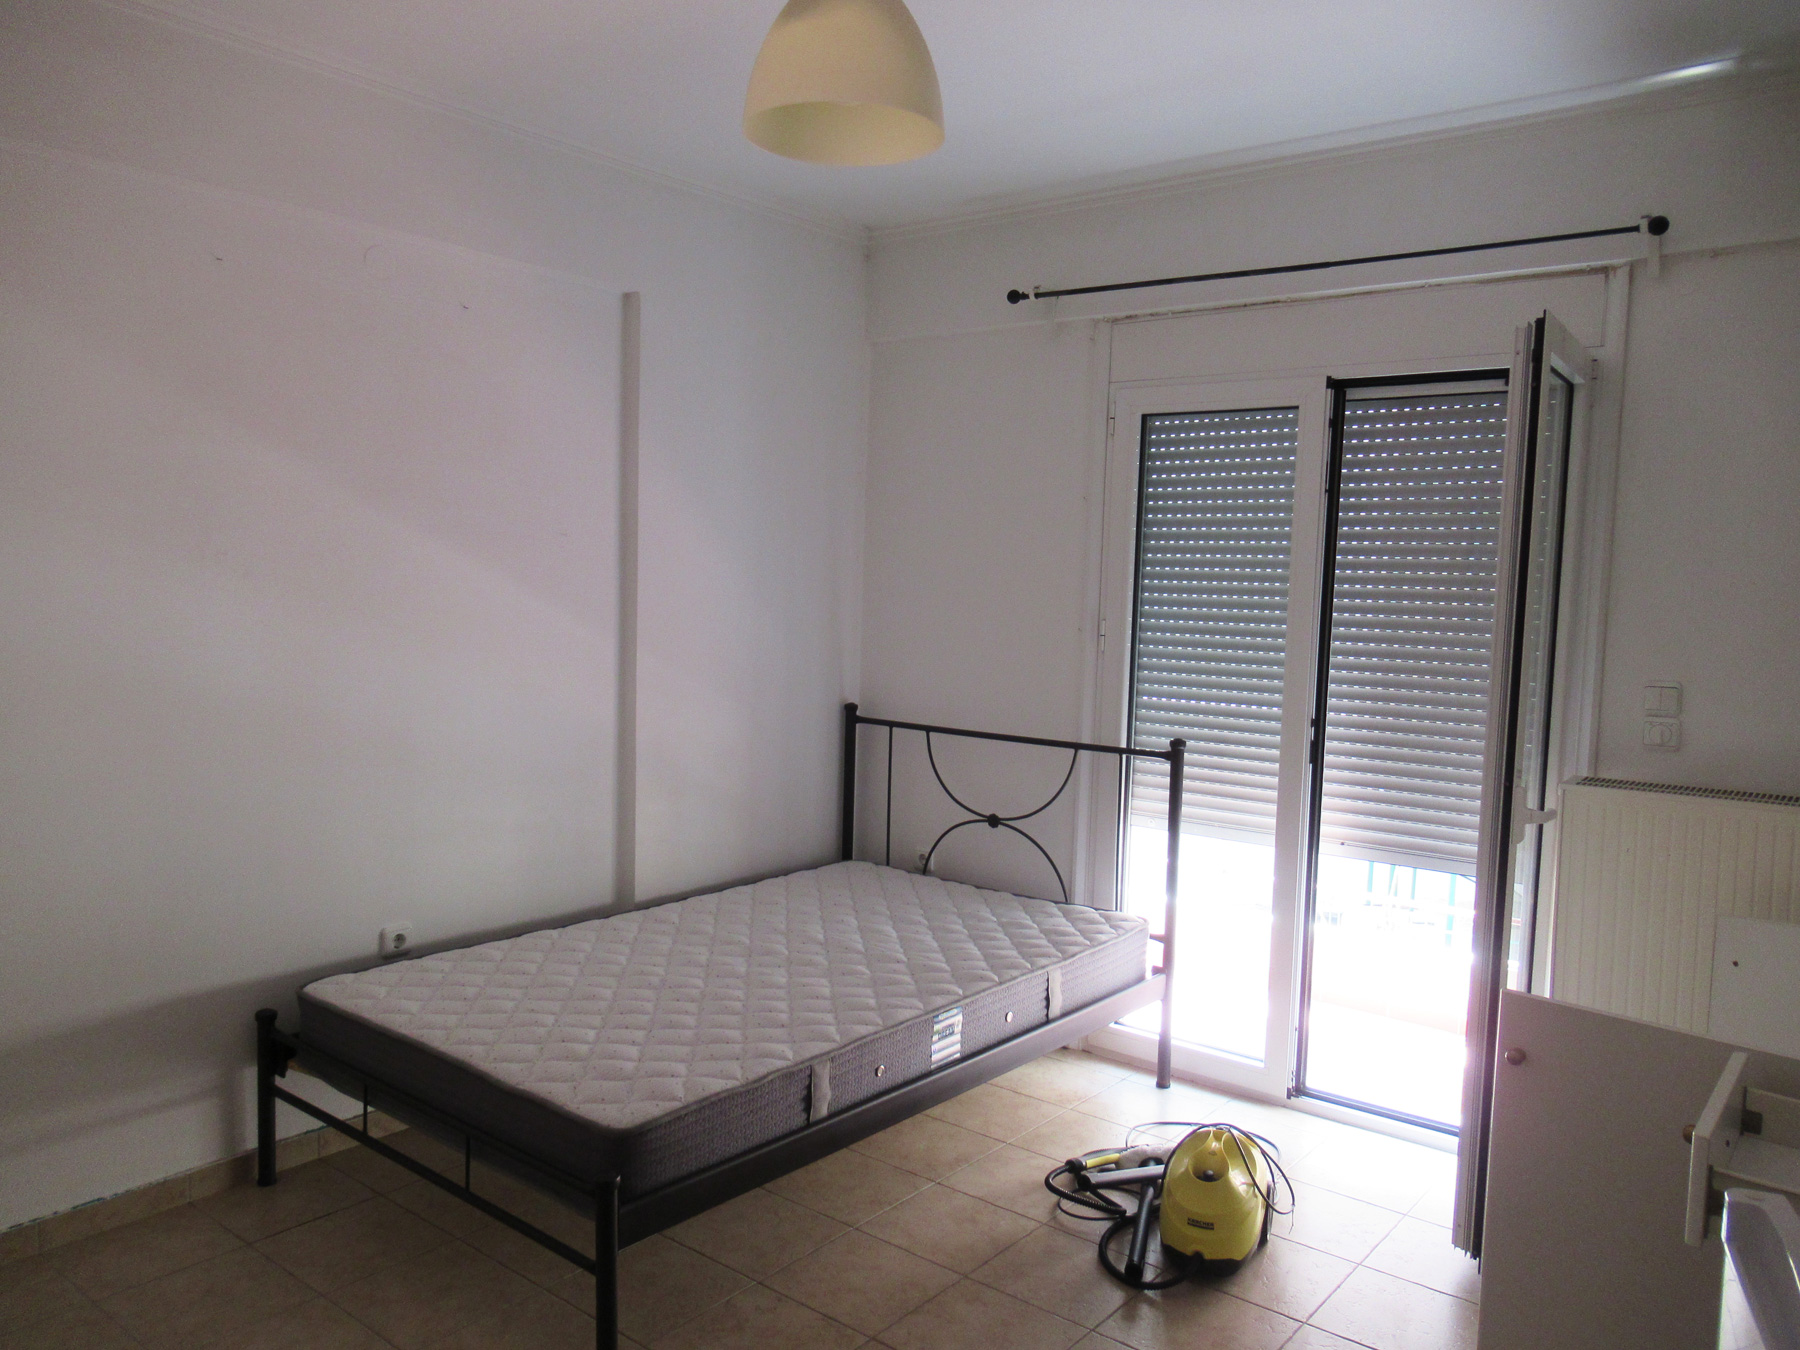 For rent furnished studio type of 22 sq.m. on the 1st floor of an apartment building in the center of Ioannina